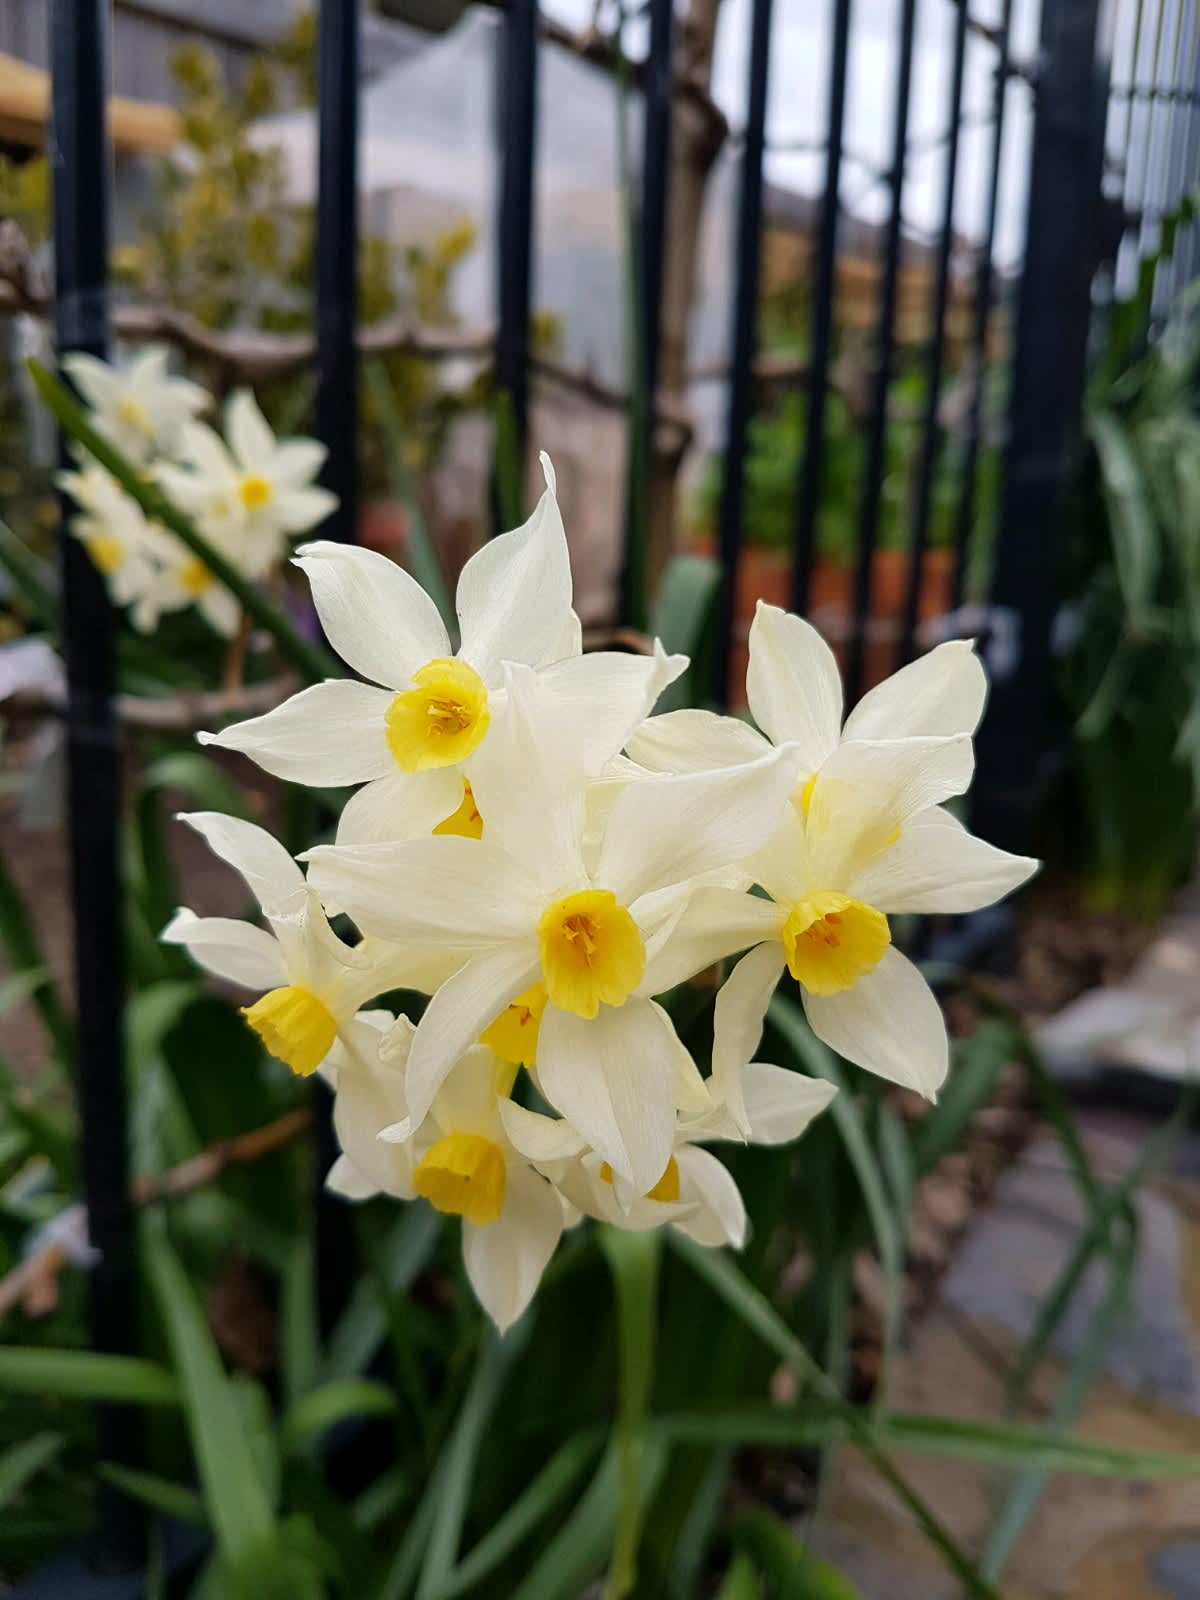 $1 For 3 Local Pickup Only Rare Daffodil Bulbs Mixed Varieties 